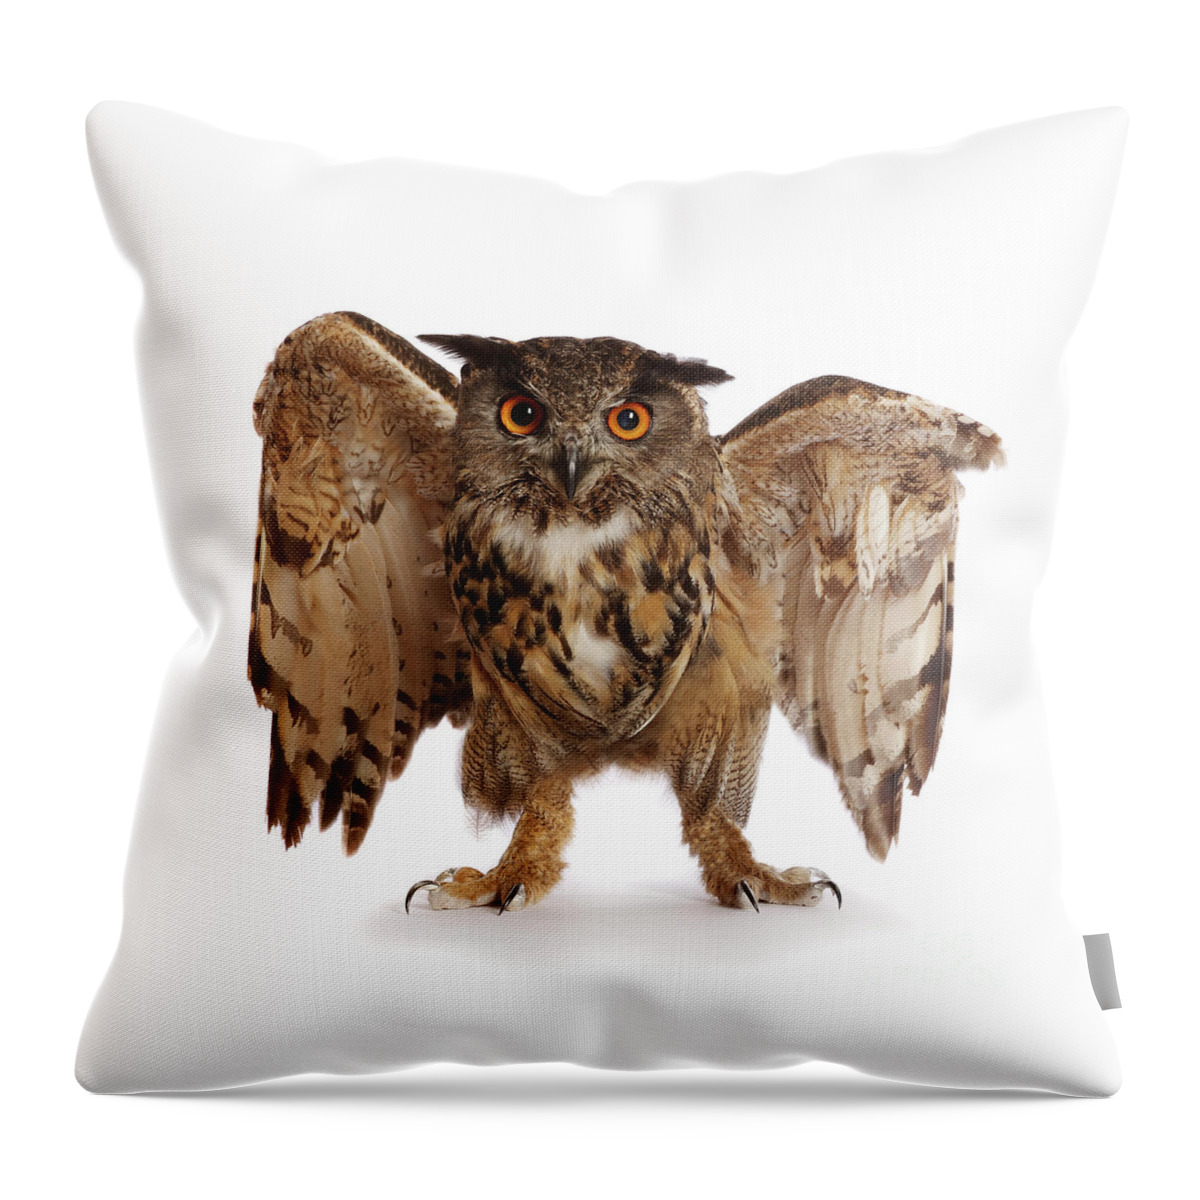 European Eagle Owl Throw Pillow featuring the photograph Irritable Owl Syndrome by Warren Photographic